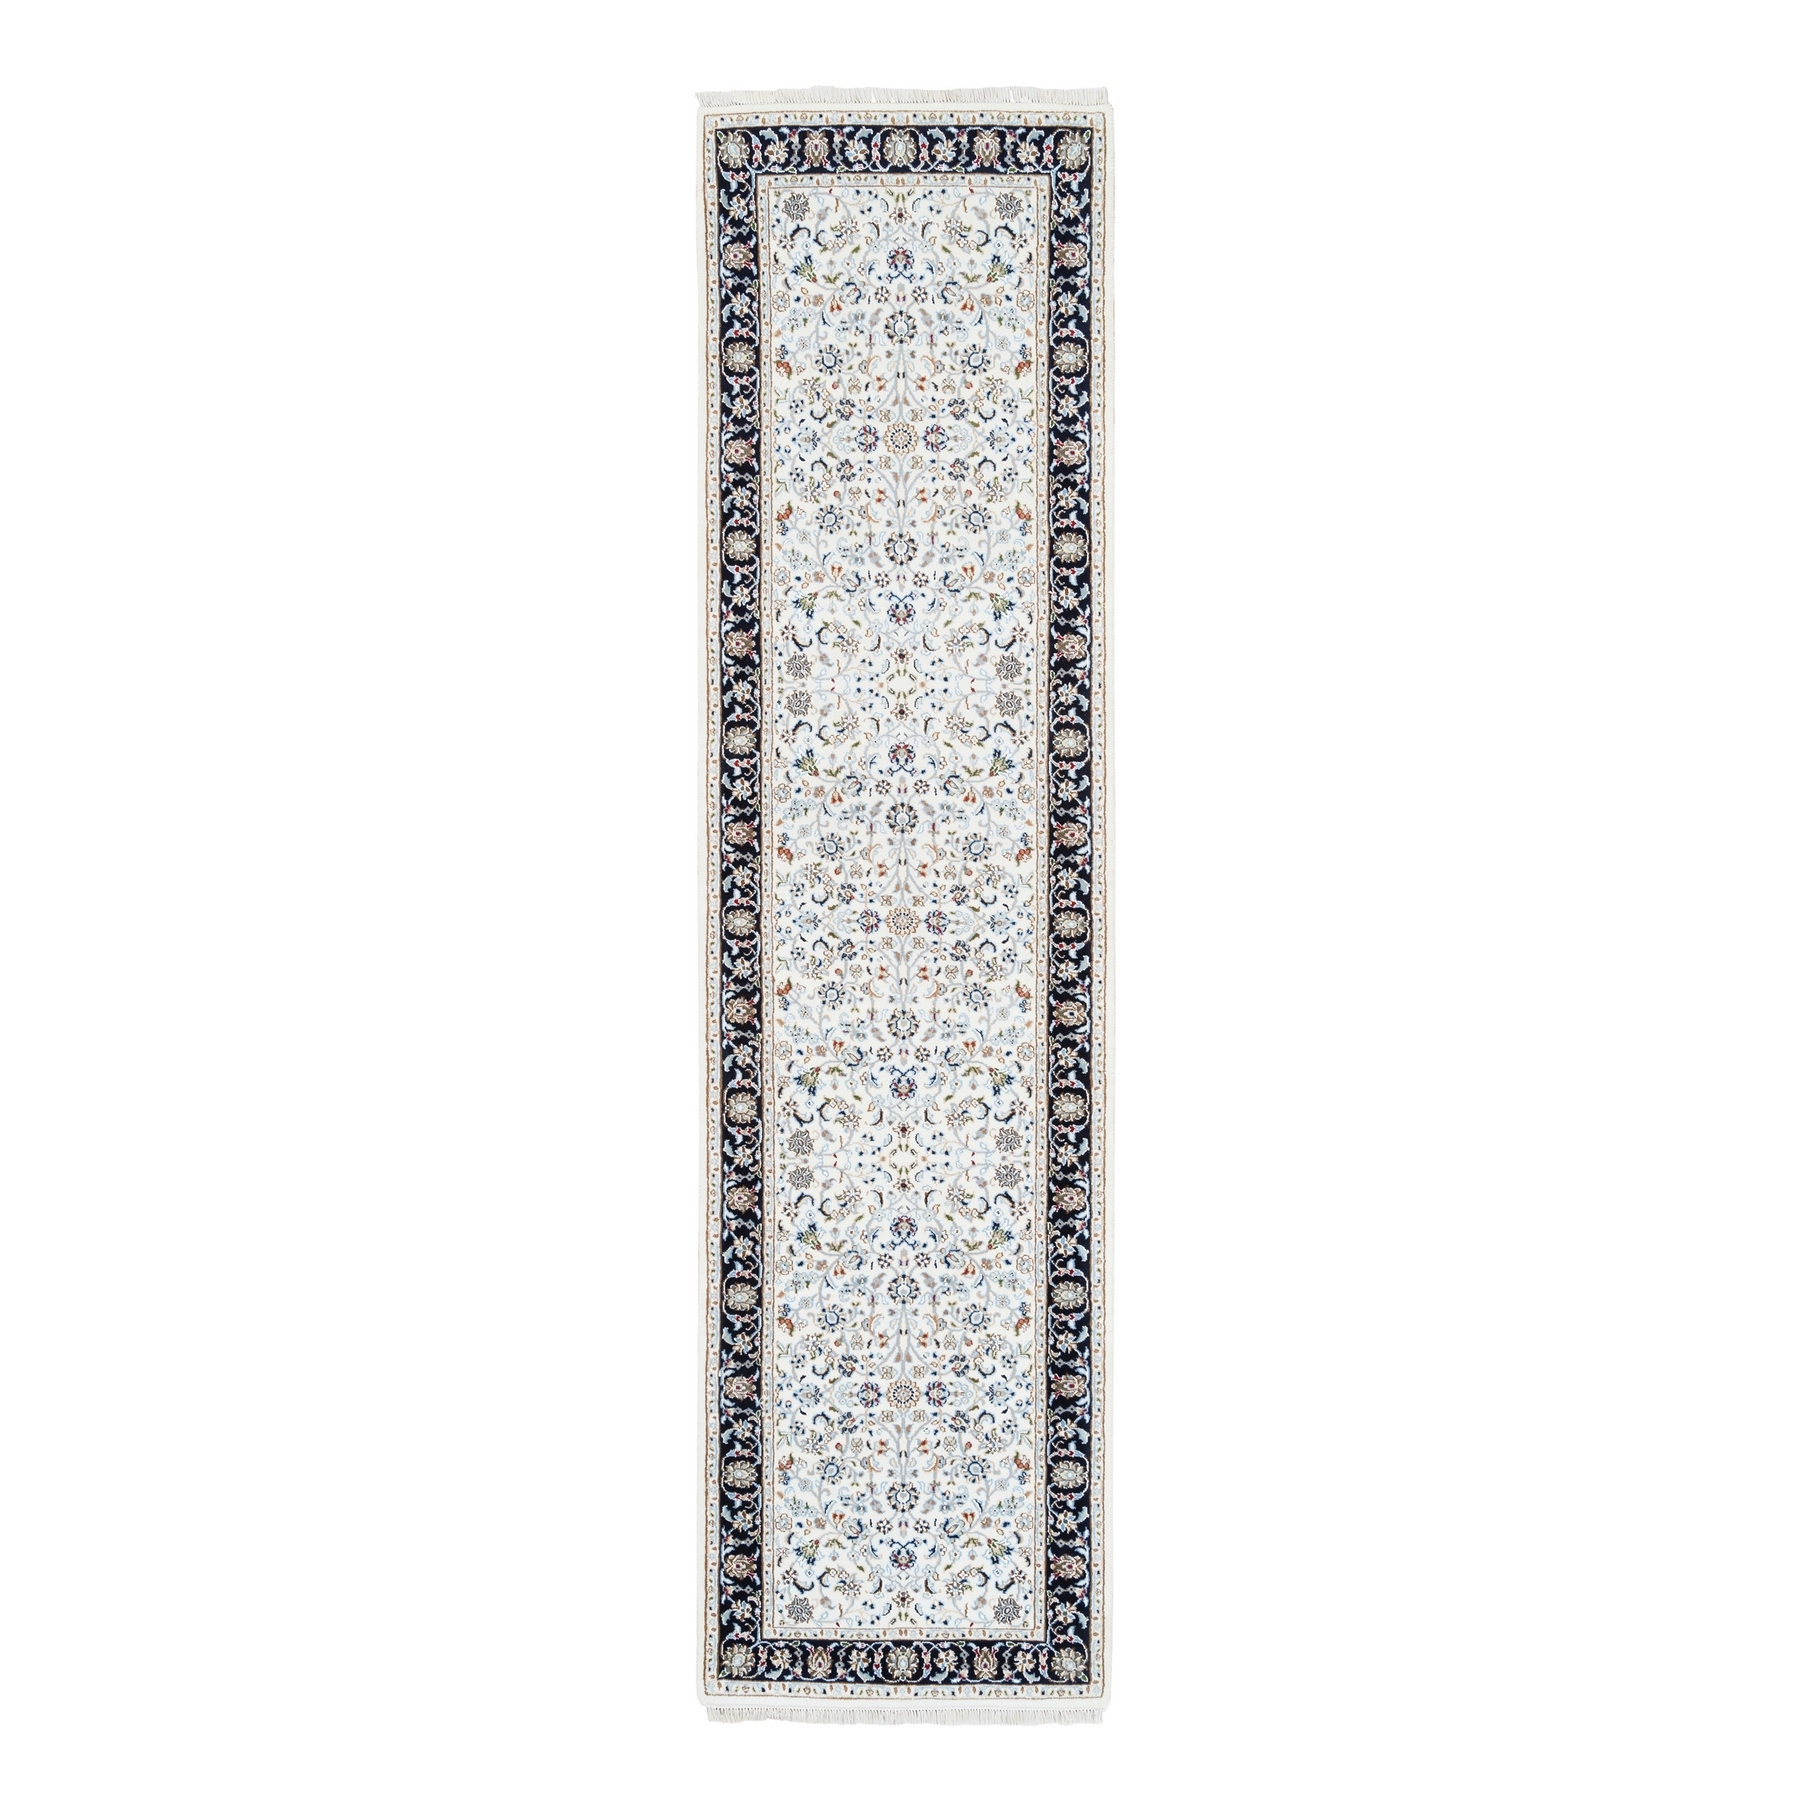 Pirniakan Collection Hand Knotted Ivory Rug No: 1125428